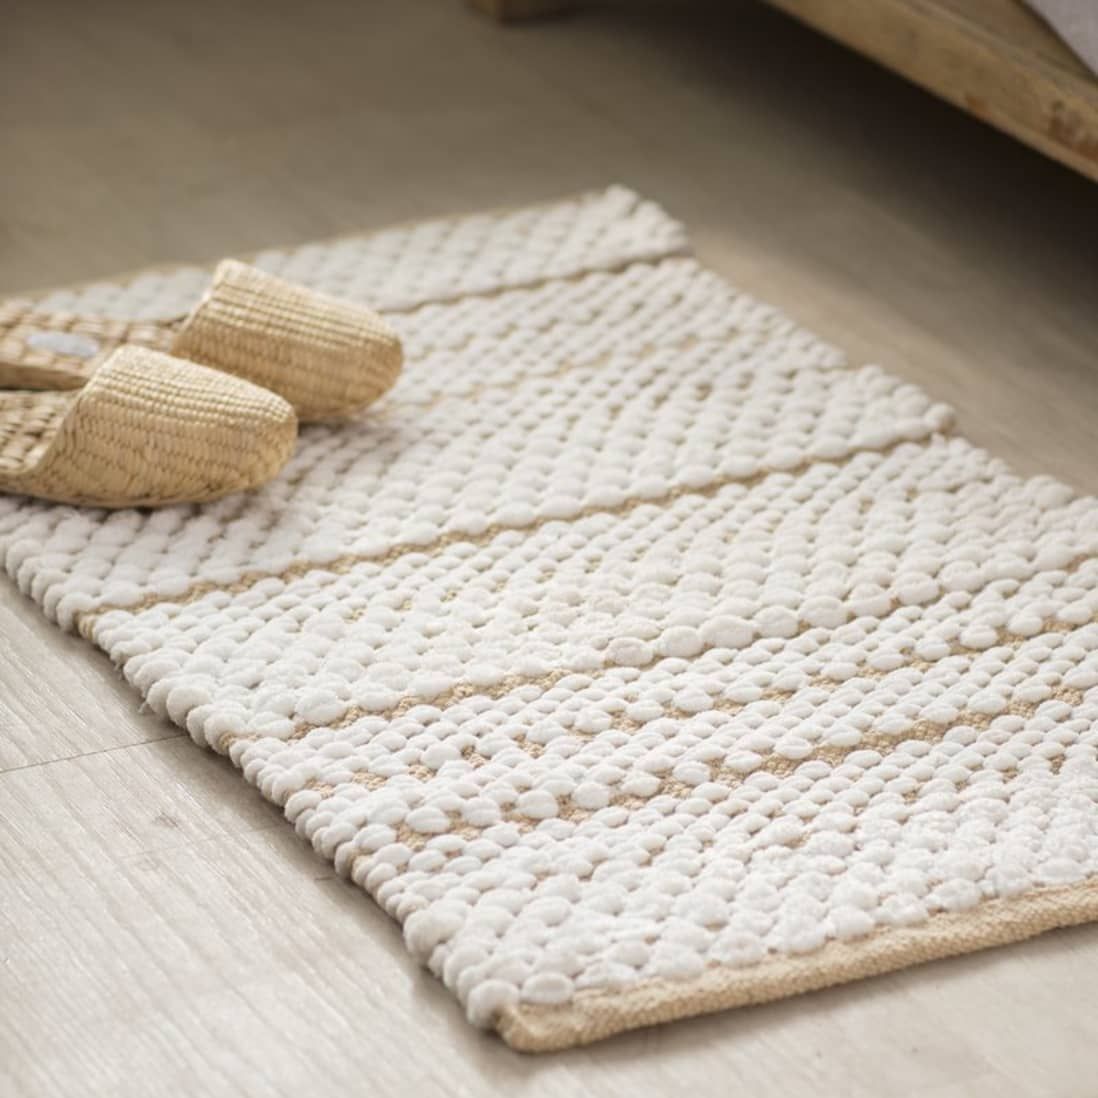 Some important facts about bathroom mats